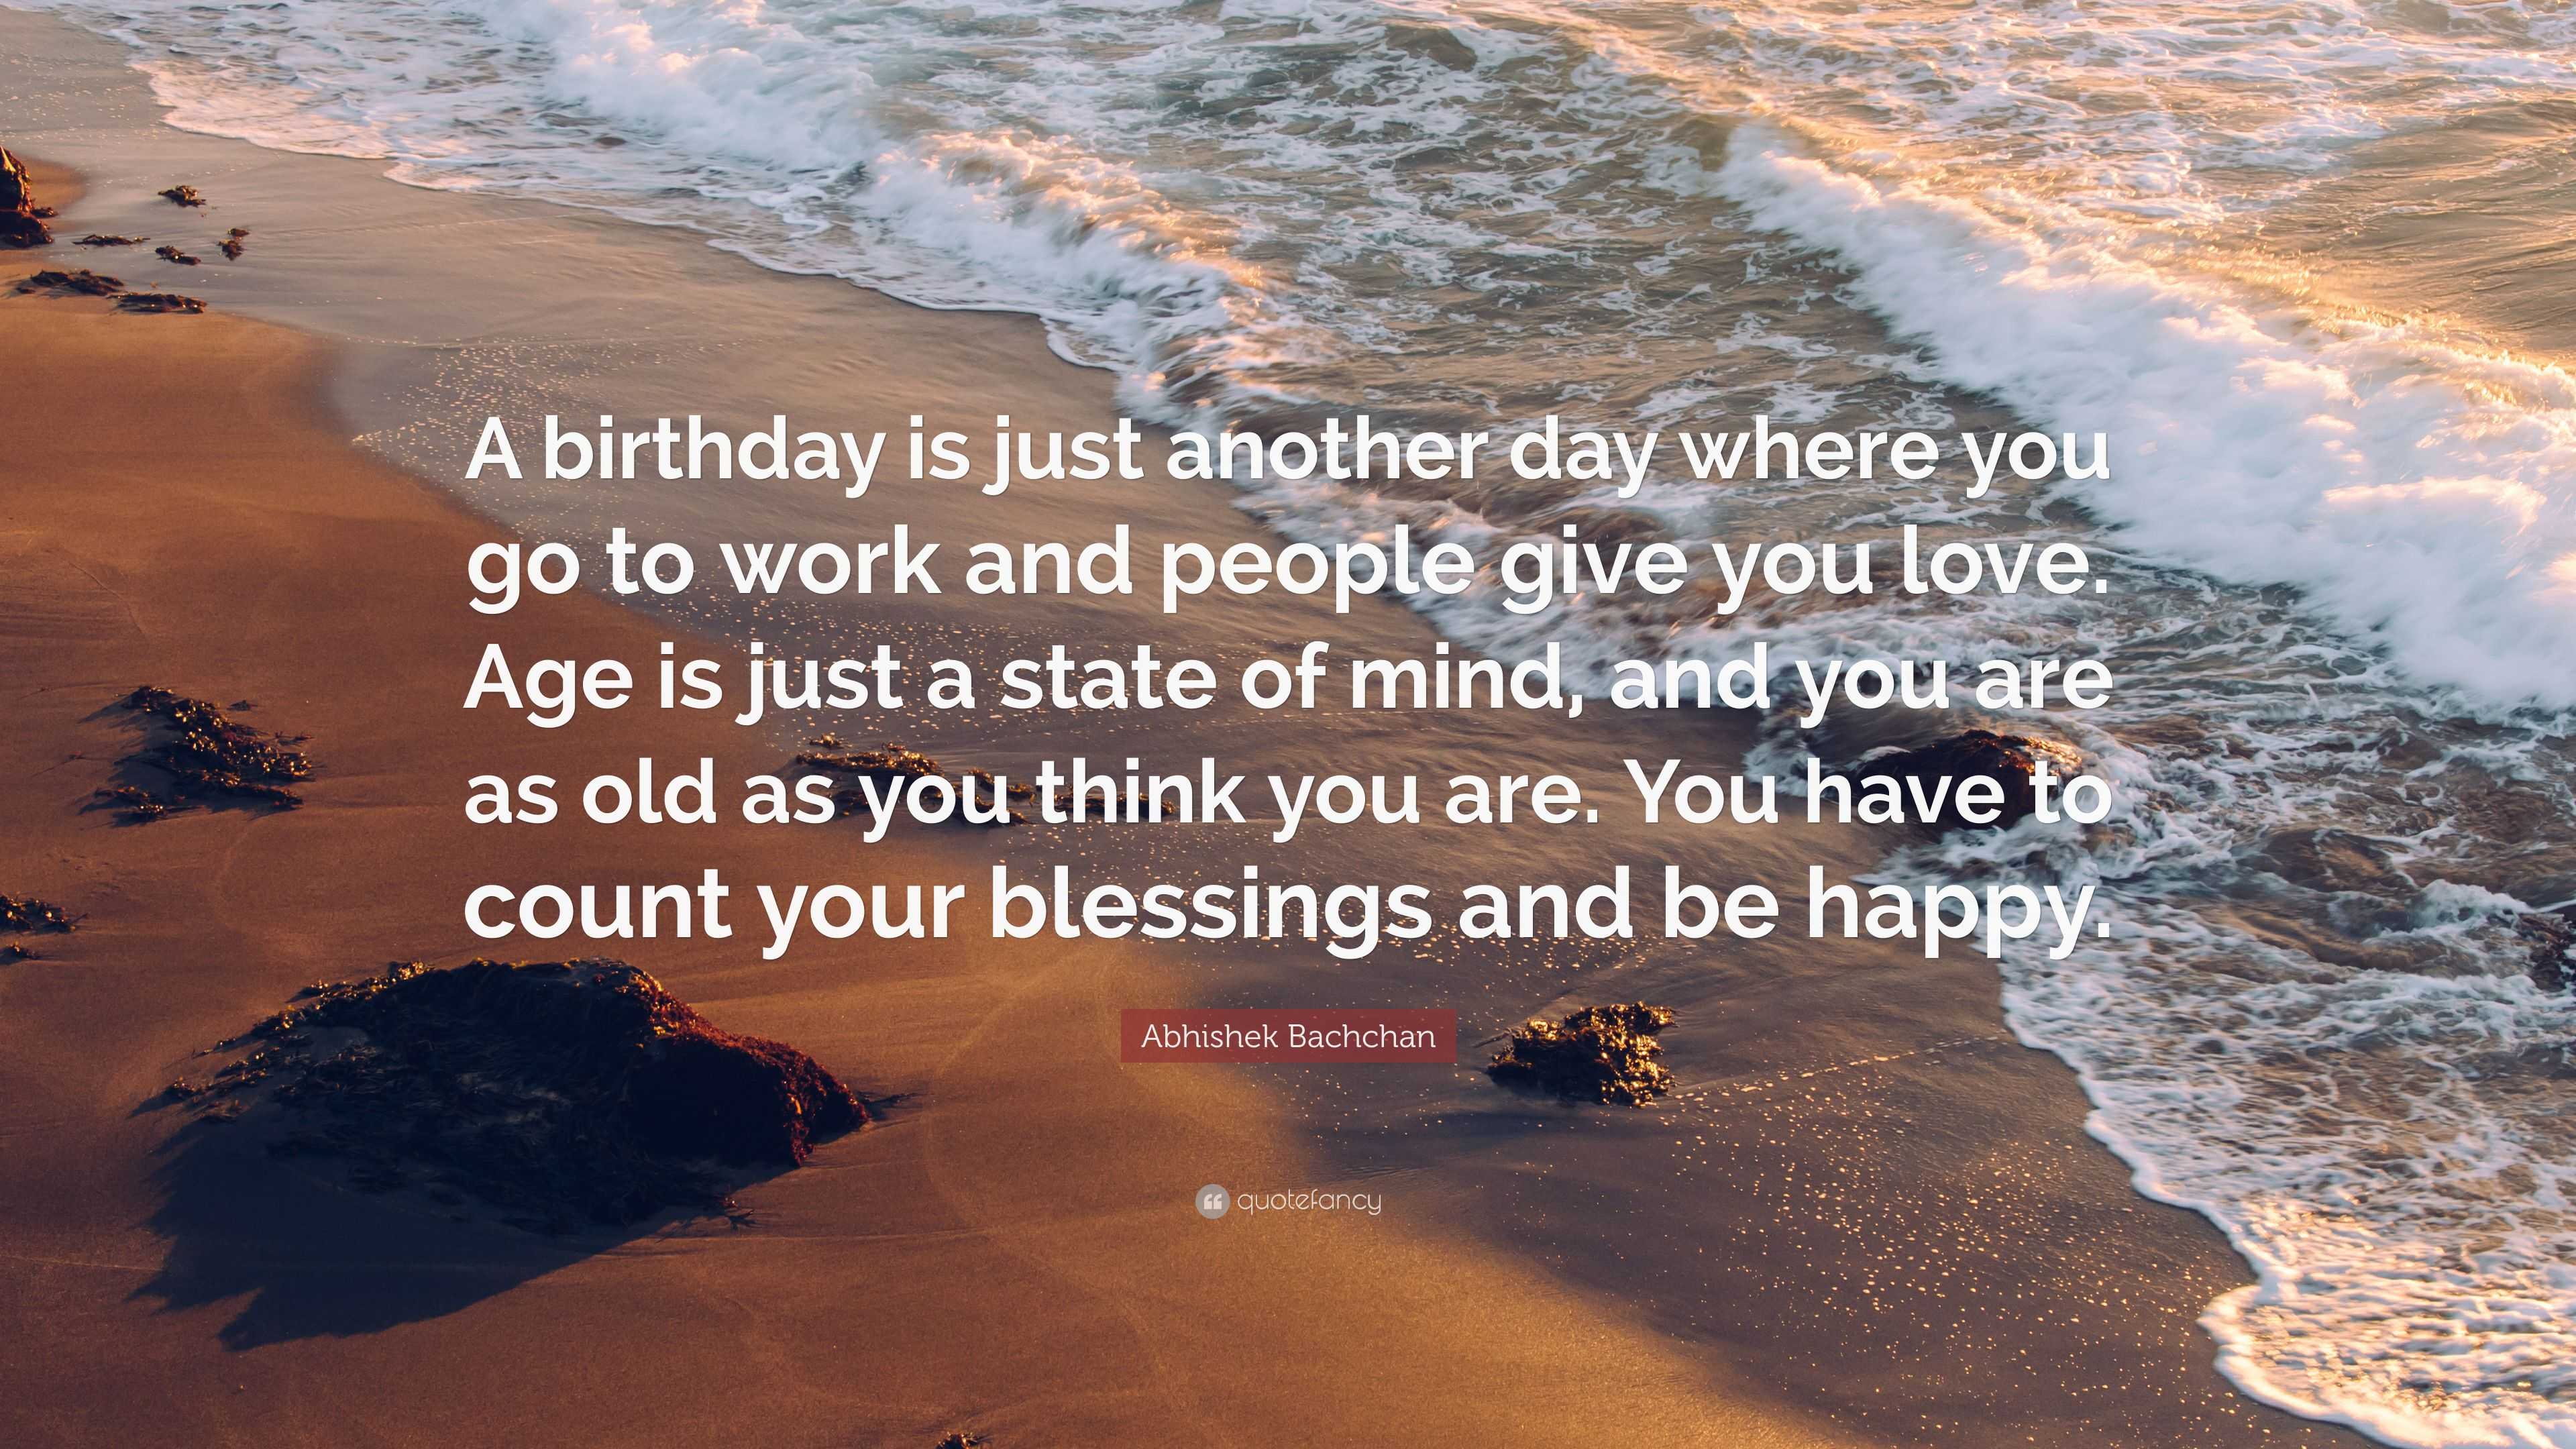 Abhishek Bachchan Quote: “A birthday is just another day where you go ...